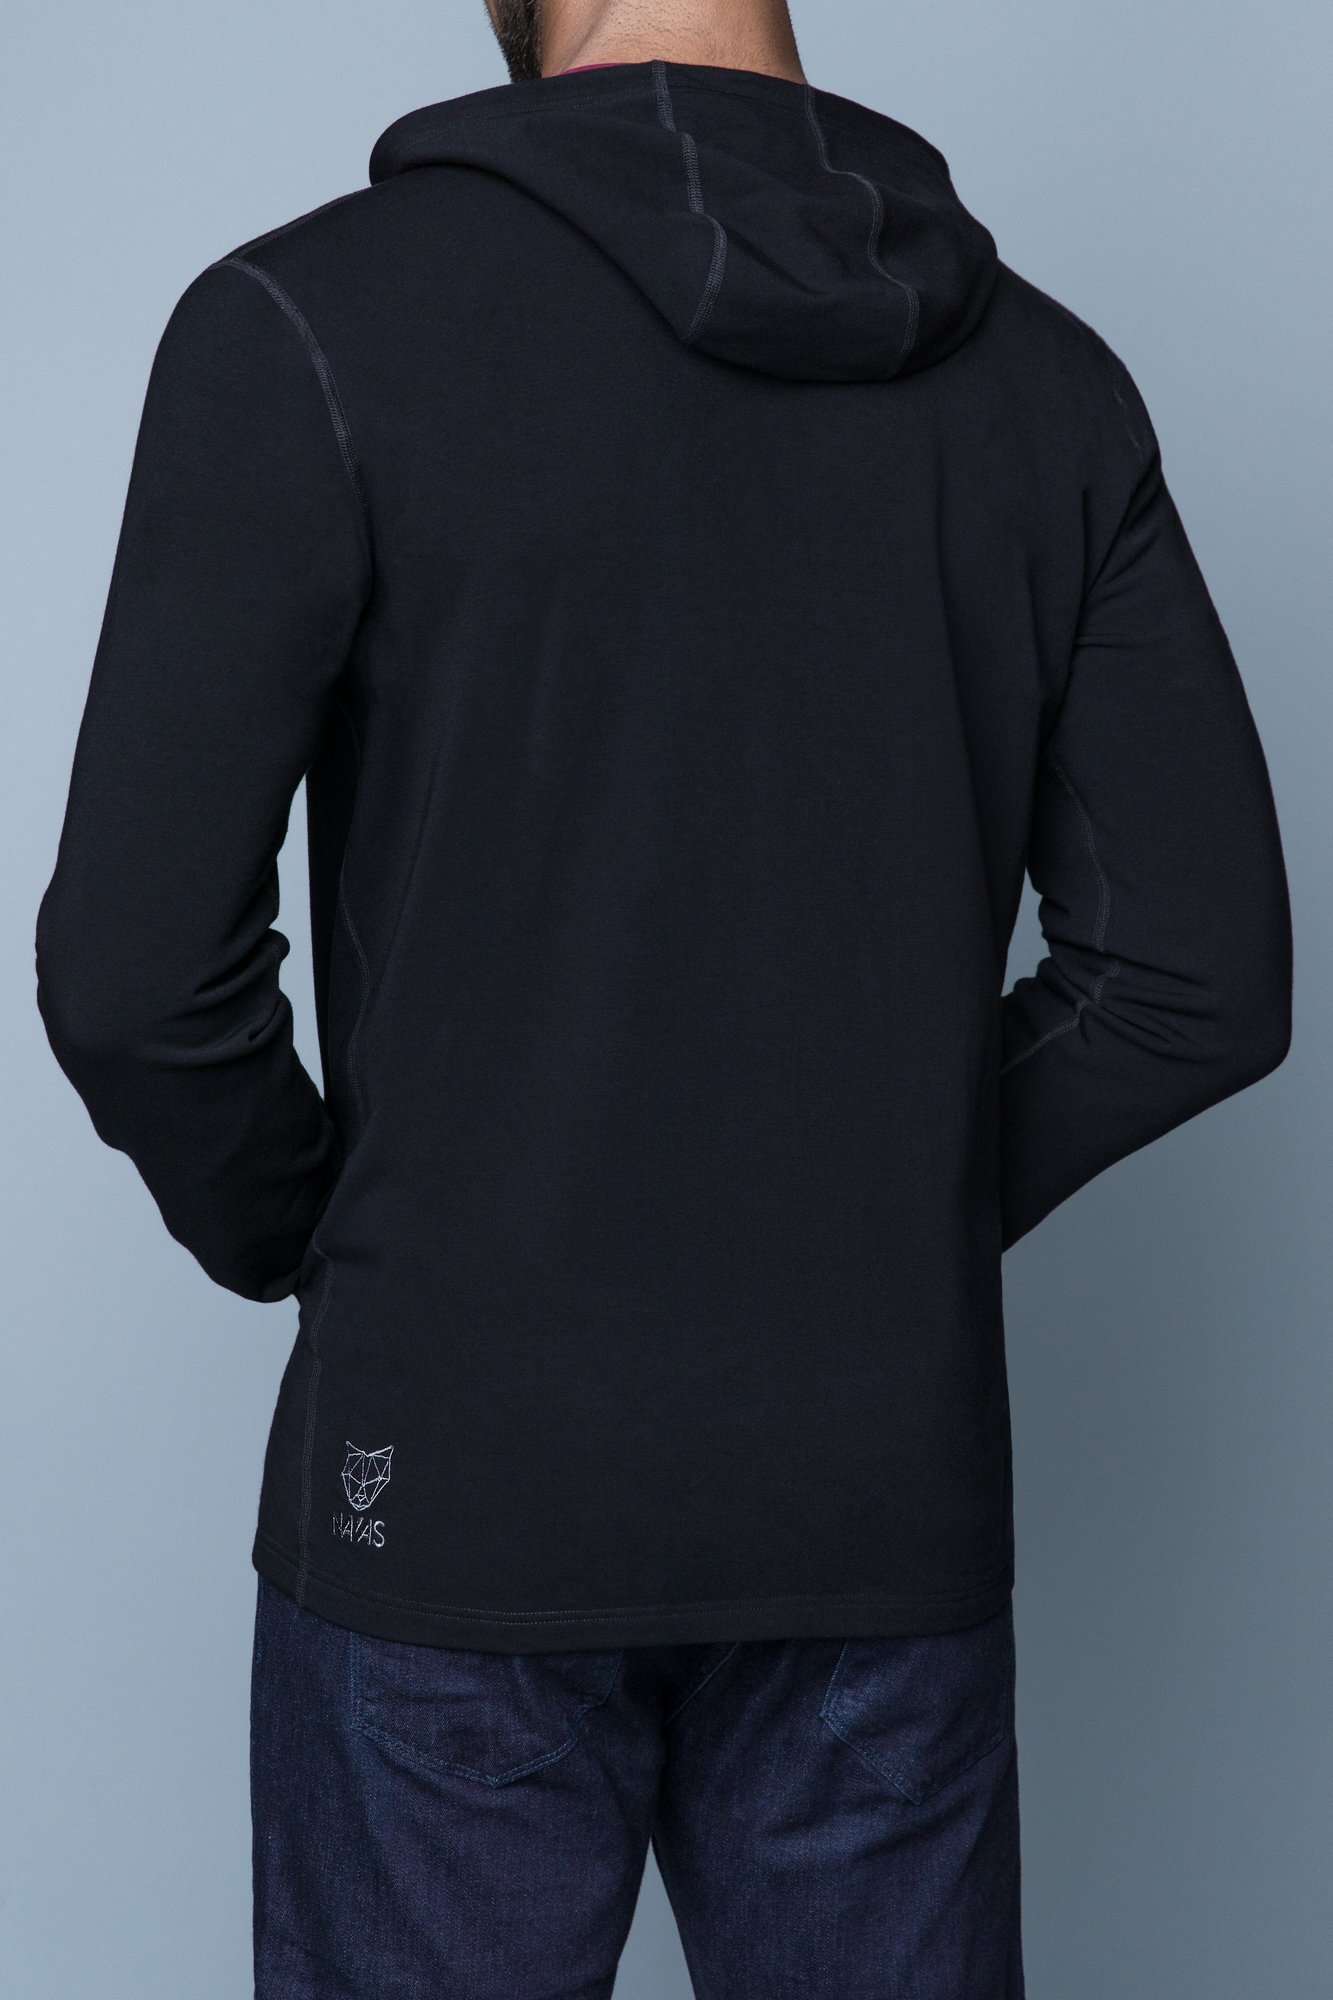 The Navas Lab Hawkins tall hoodie in black. The perfect tall slim hoodie for tall and slim guys looking for style and comfort. Tall skinny guy sweater hoodie in black.